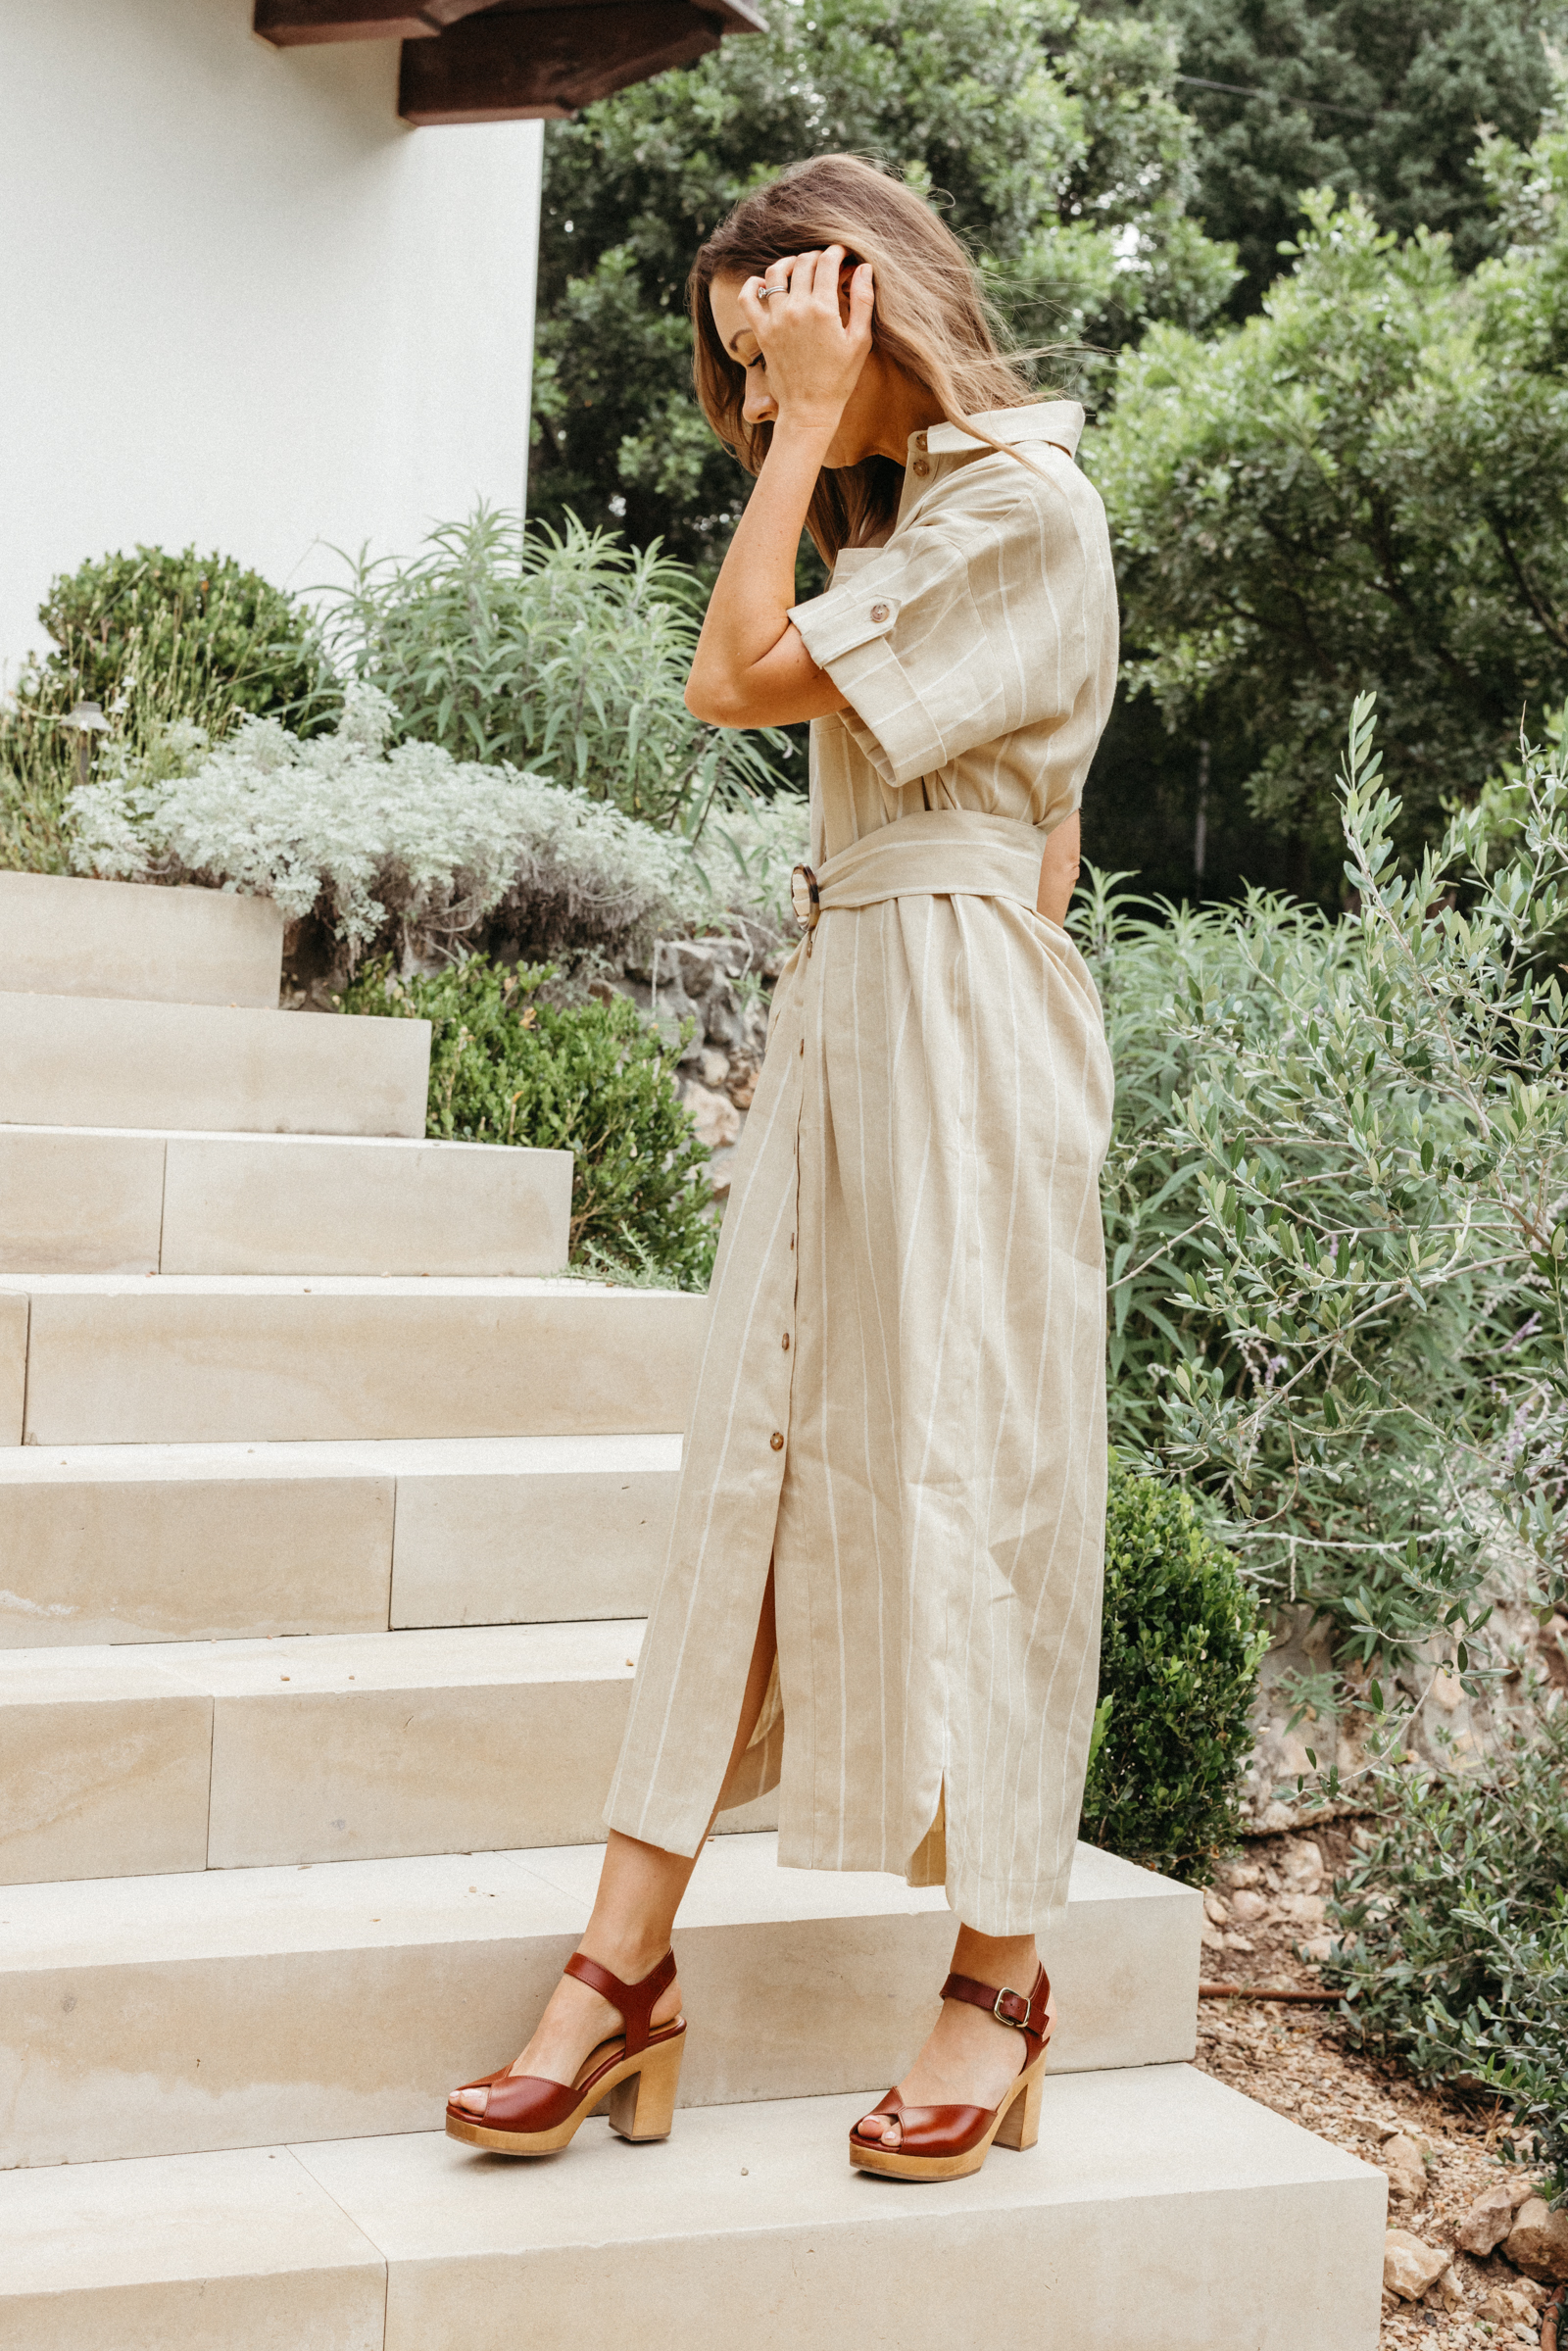 camille in a neutral linen shirtdress for a picnic